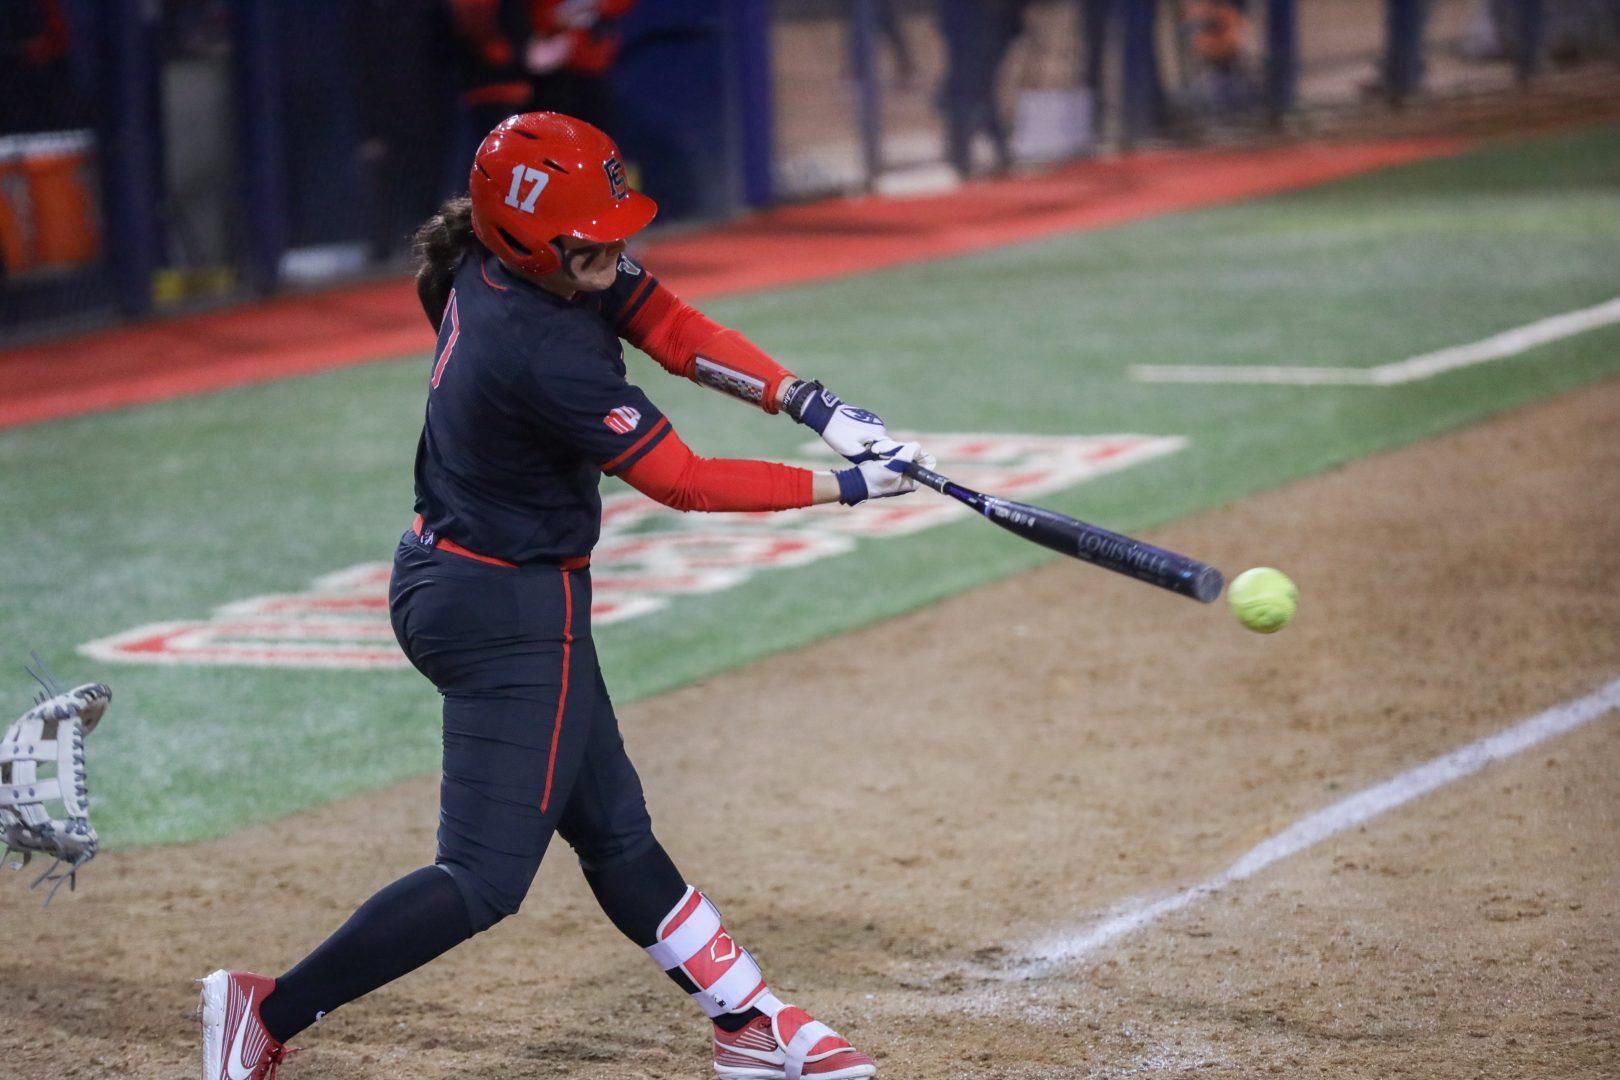 Fresno State catcher Kelcey Carrasco strikes the ball while batting during the Bulldog’s 13-1 victory over Cal Poly at Margie Wright Diamond on Feb. 15, 2020. (Vendila Yang/The Collegian)